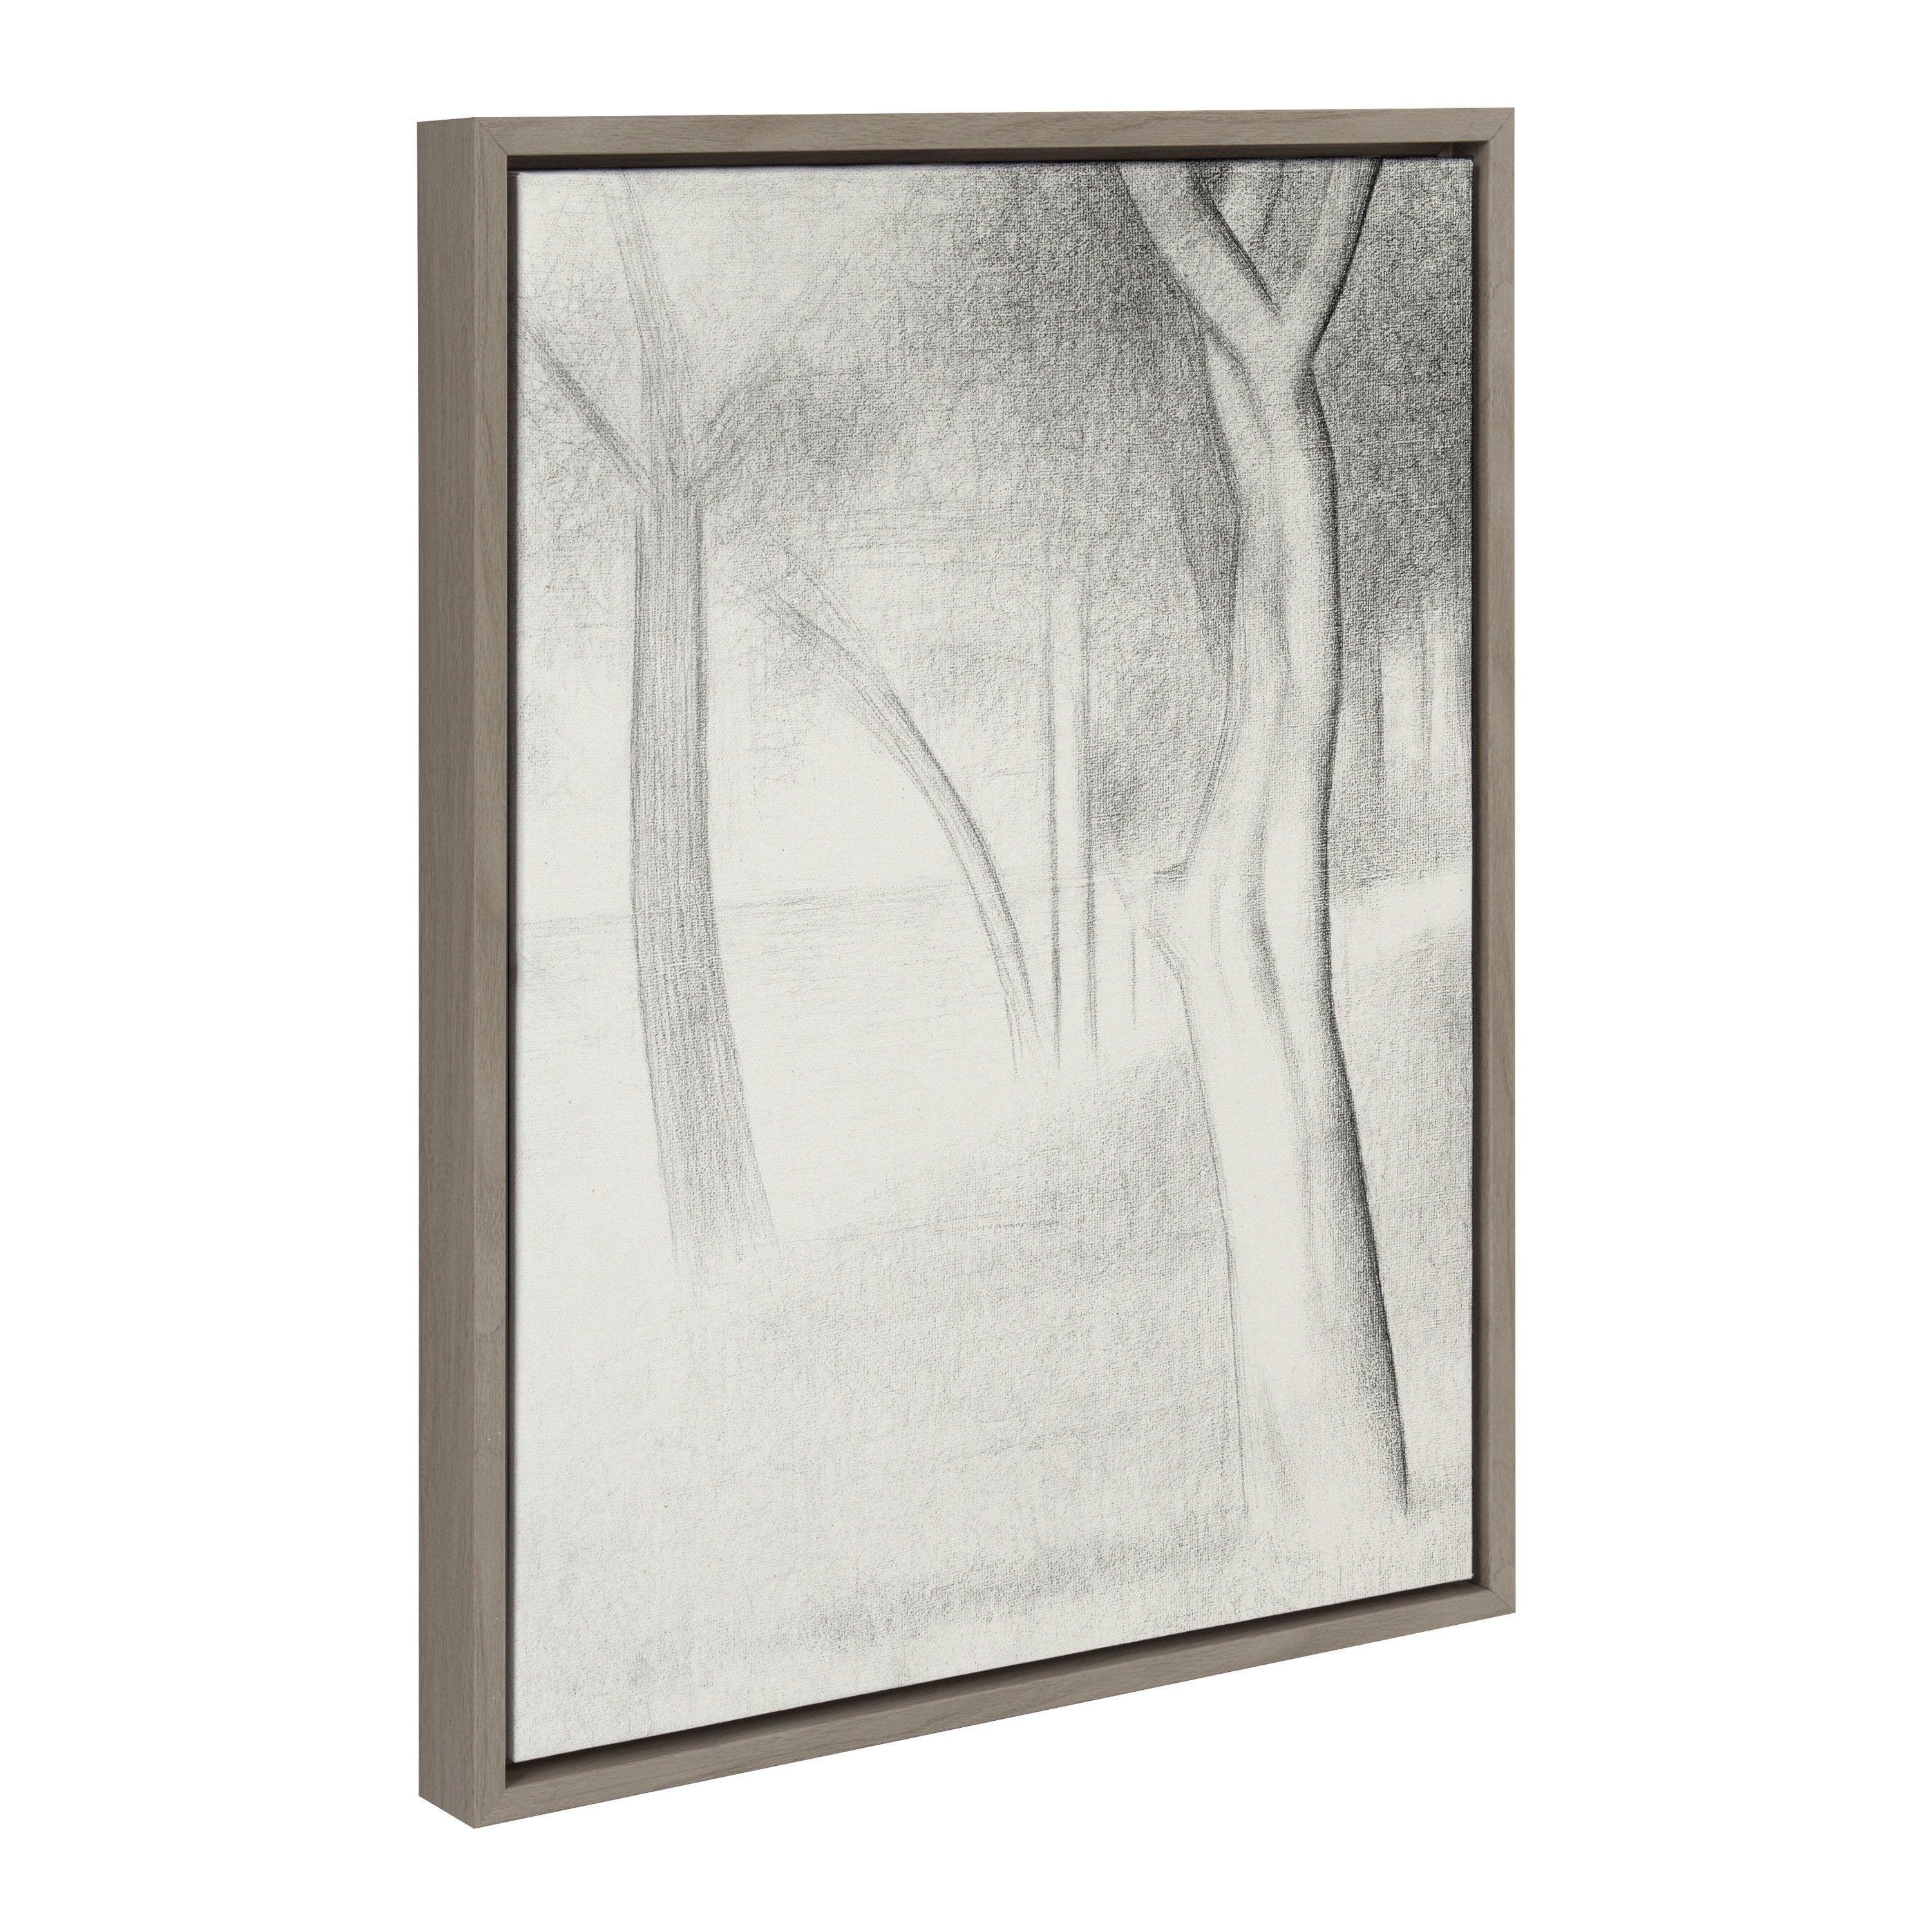 Sylvie Georges Seurat Trees 1884 BW Framed Canvas by The Art Institute of Chicago